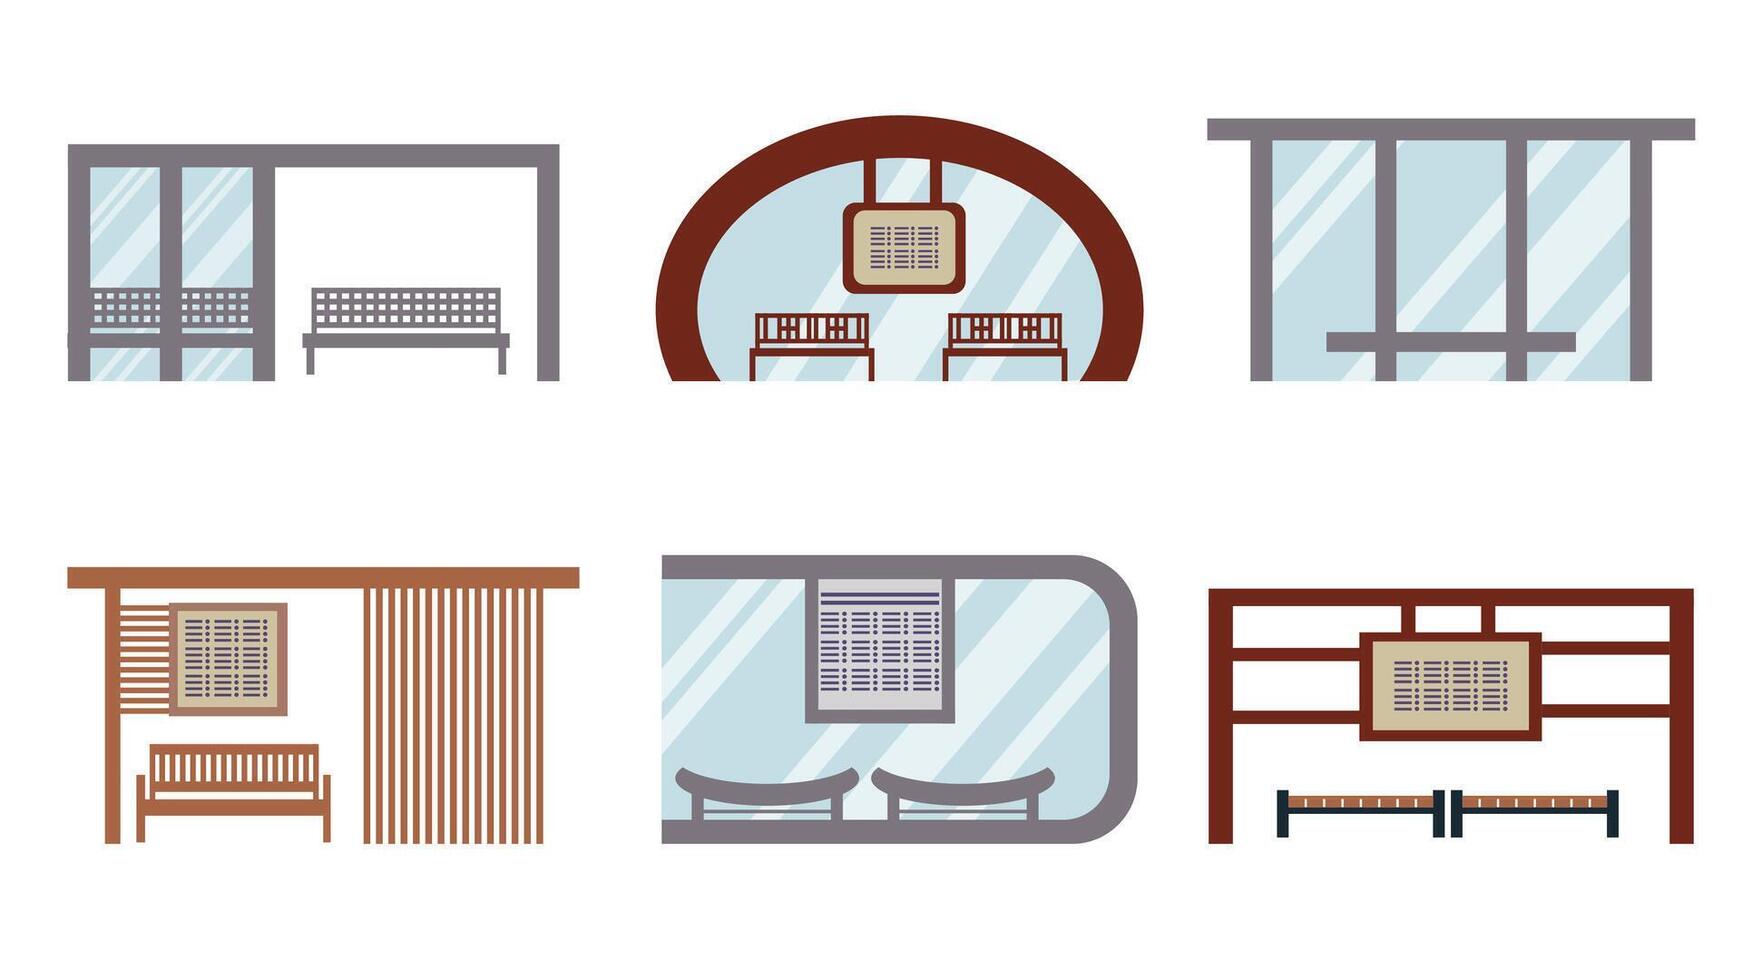 Collection of icons bus stops, elements of urban infrastructure, illustrations in flat style. vector